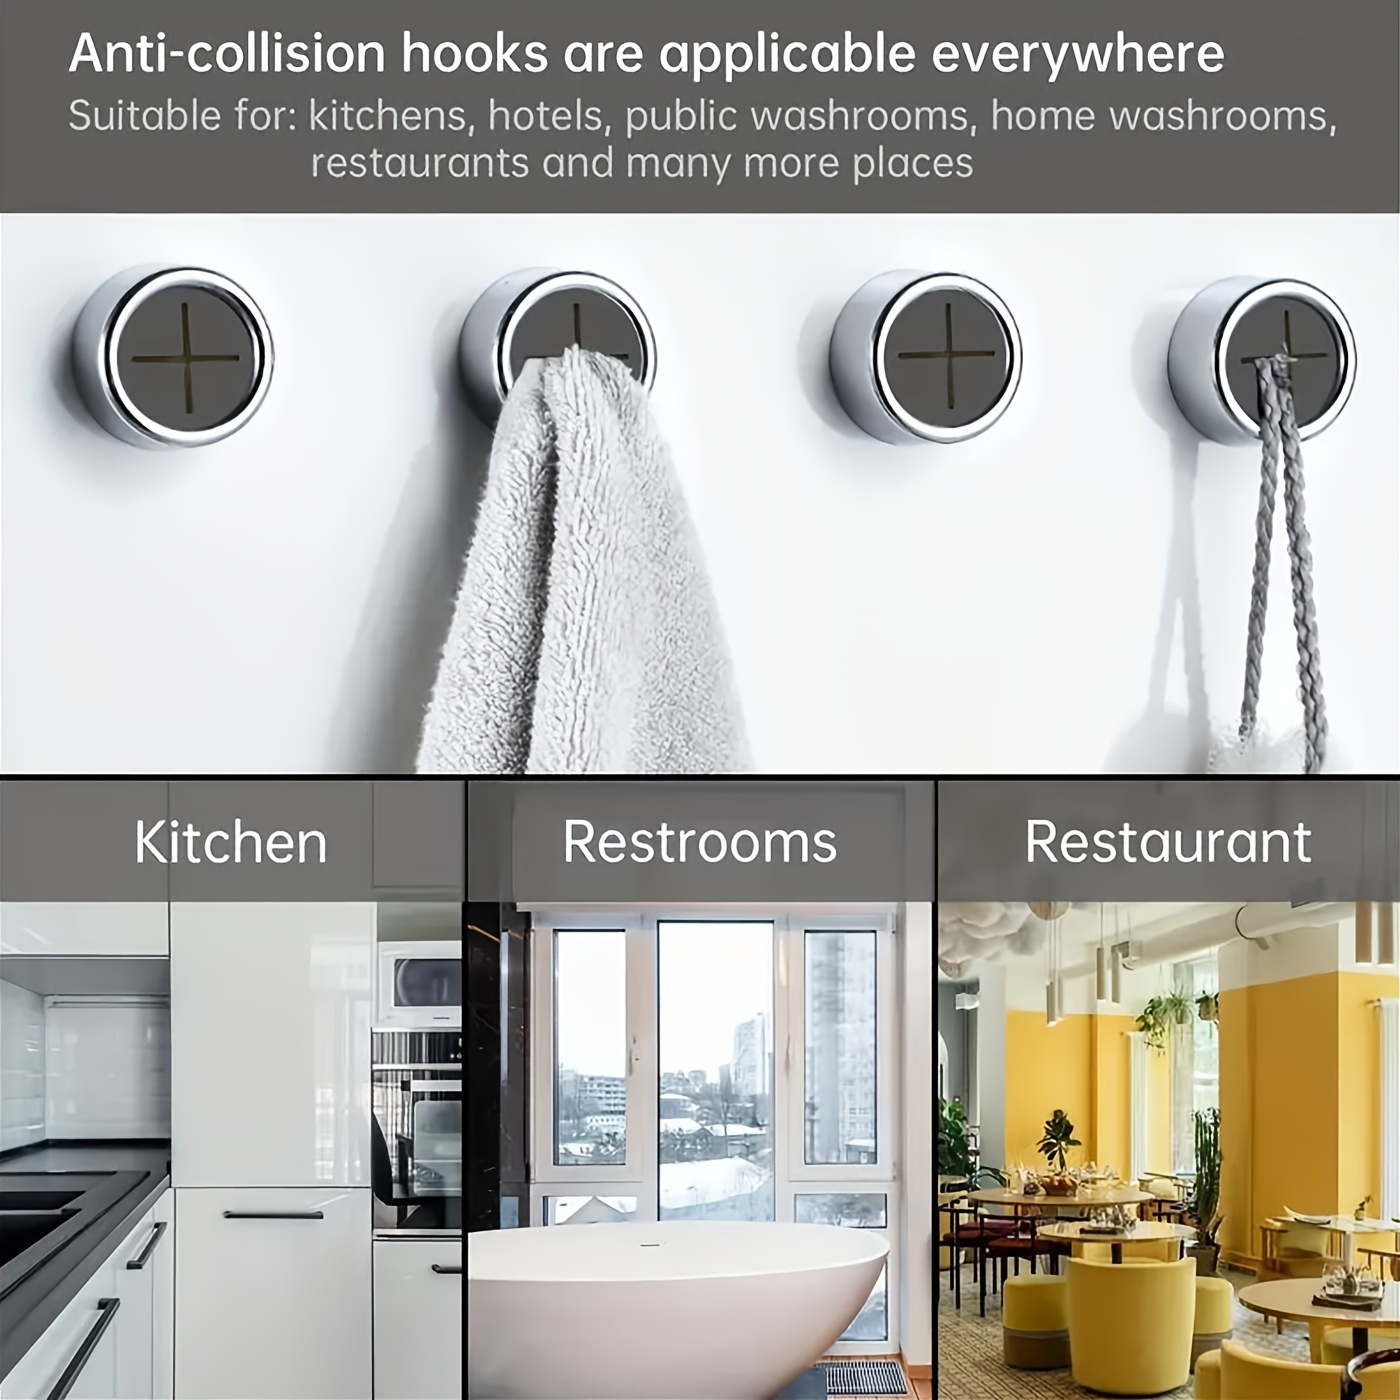 2pcs Bathroom Towel Holder, Round Self Adhesive Push Towel Hooks For  Bathroom, Hand And Dish Towels, No Drilling Required